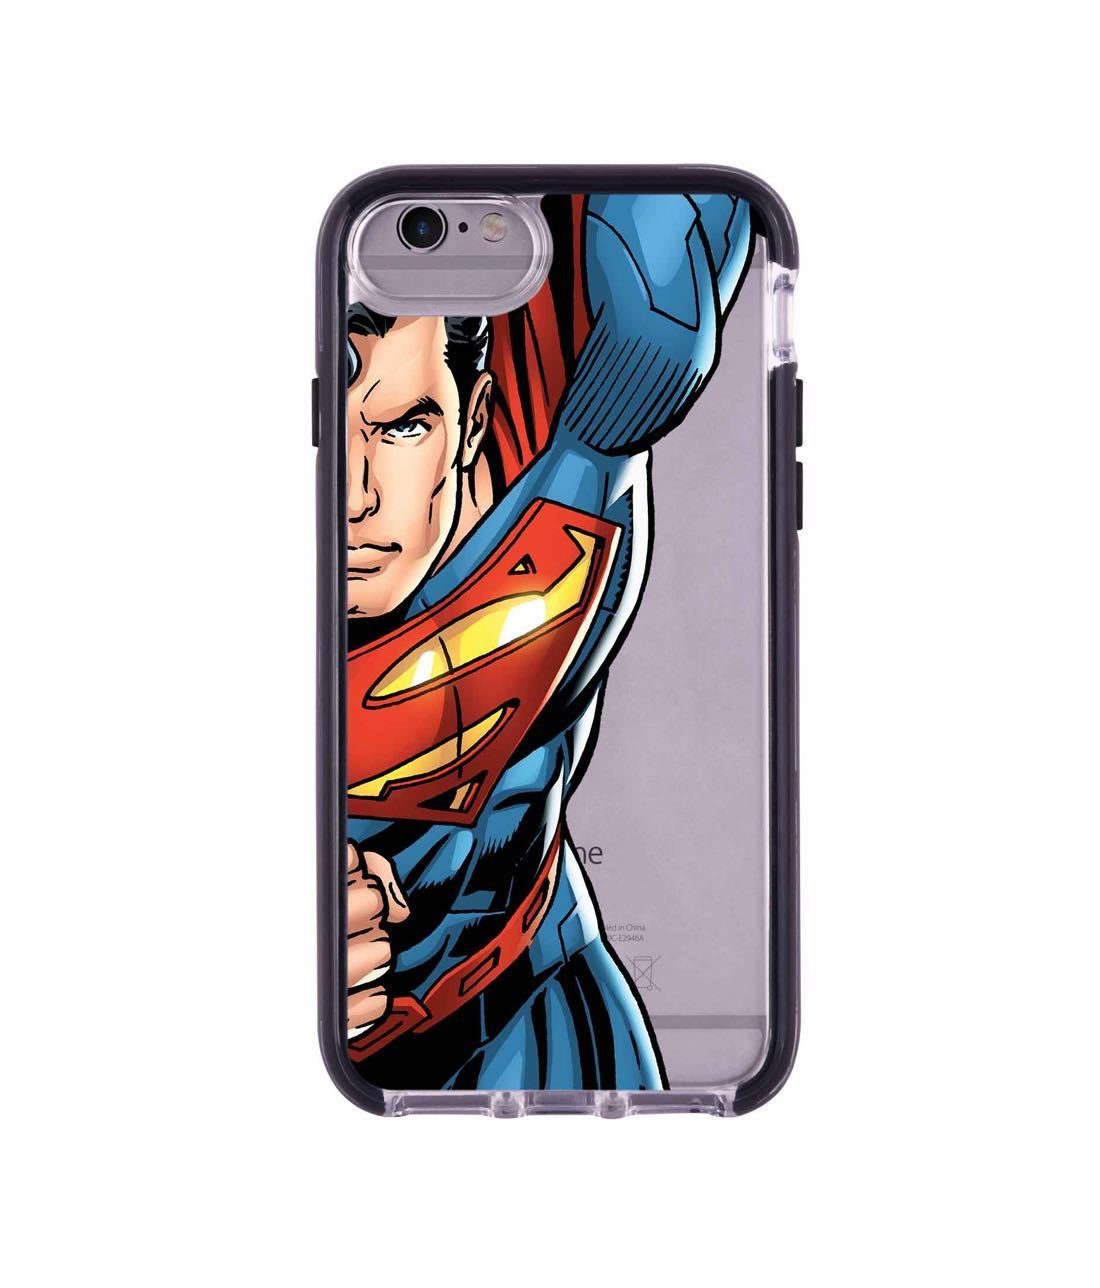 Speed it like Superman - Extreme Phone Case for iPhone 6 Plus